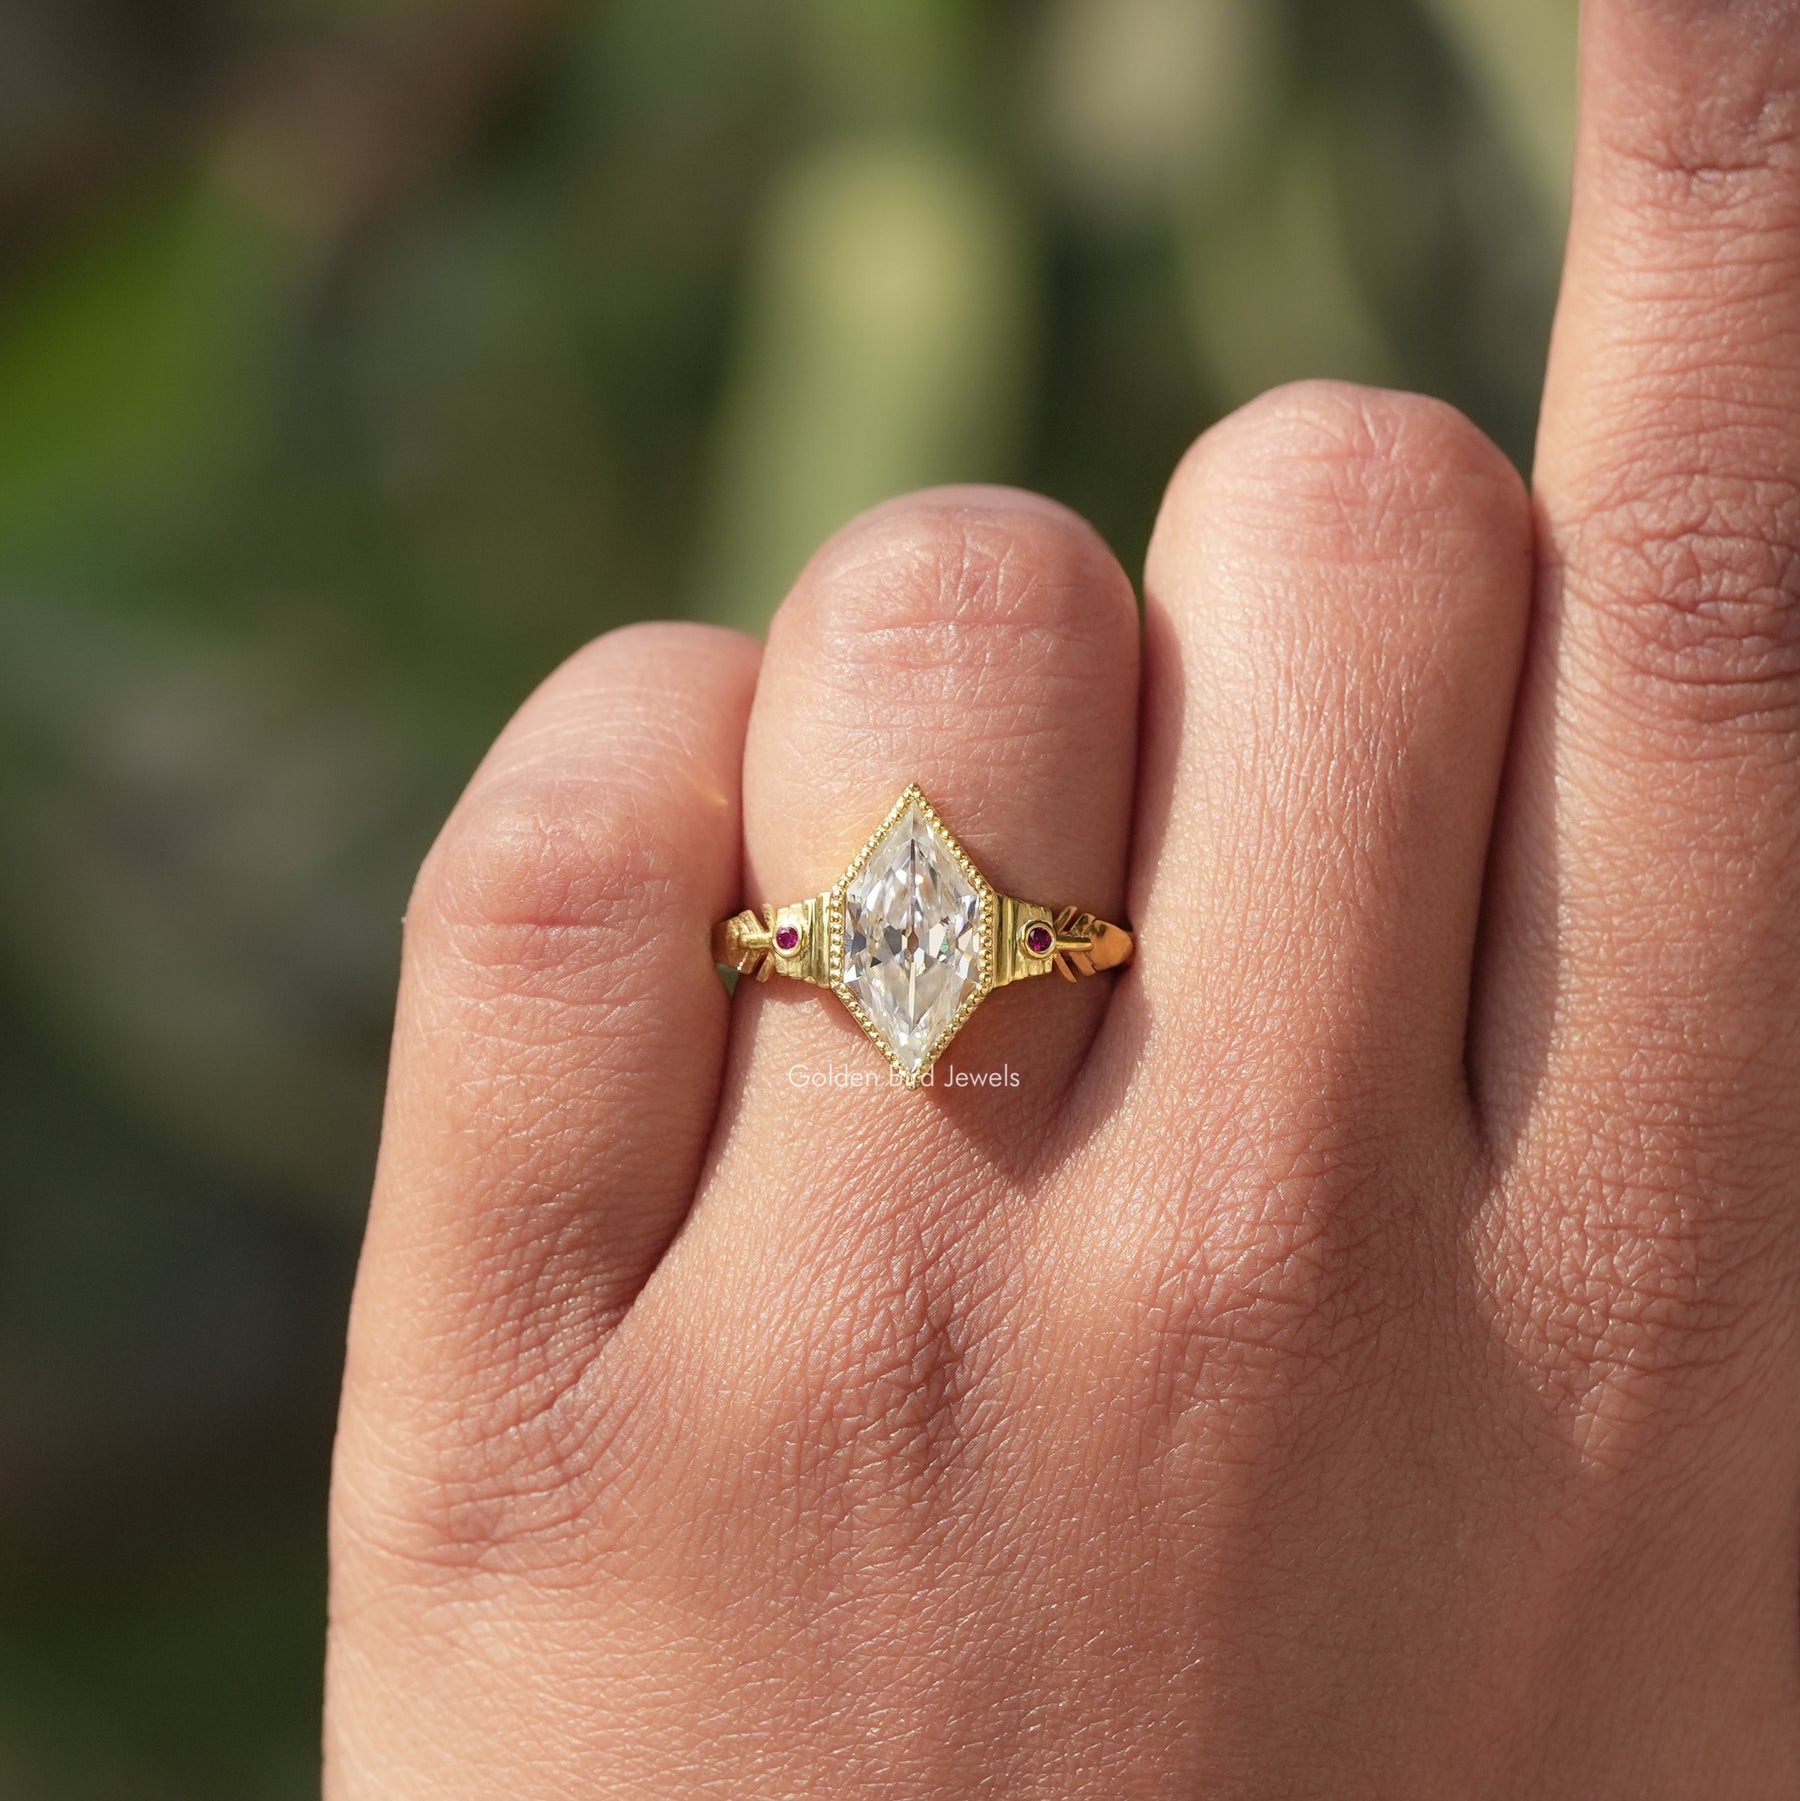 [This dutch marquise cut moissanite ring crafted with bezel setting]-[Golden Bird Jewels]